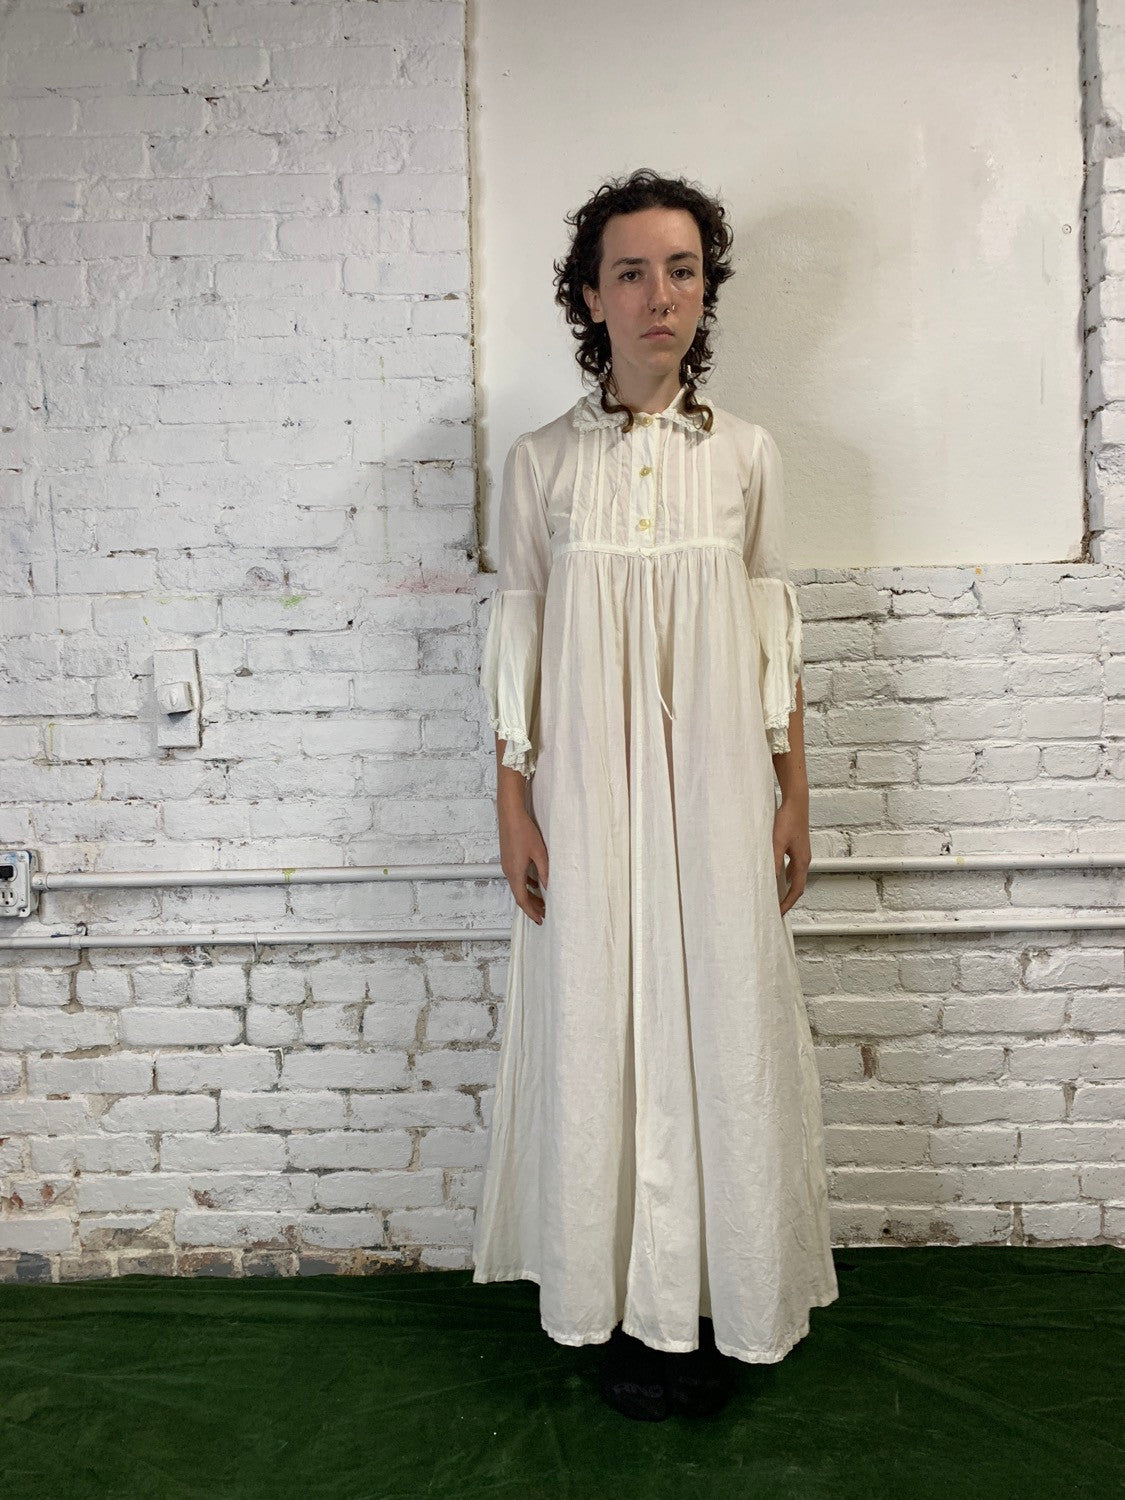 Early Laura Ashley 'Made in Wales' White Night Dress